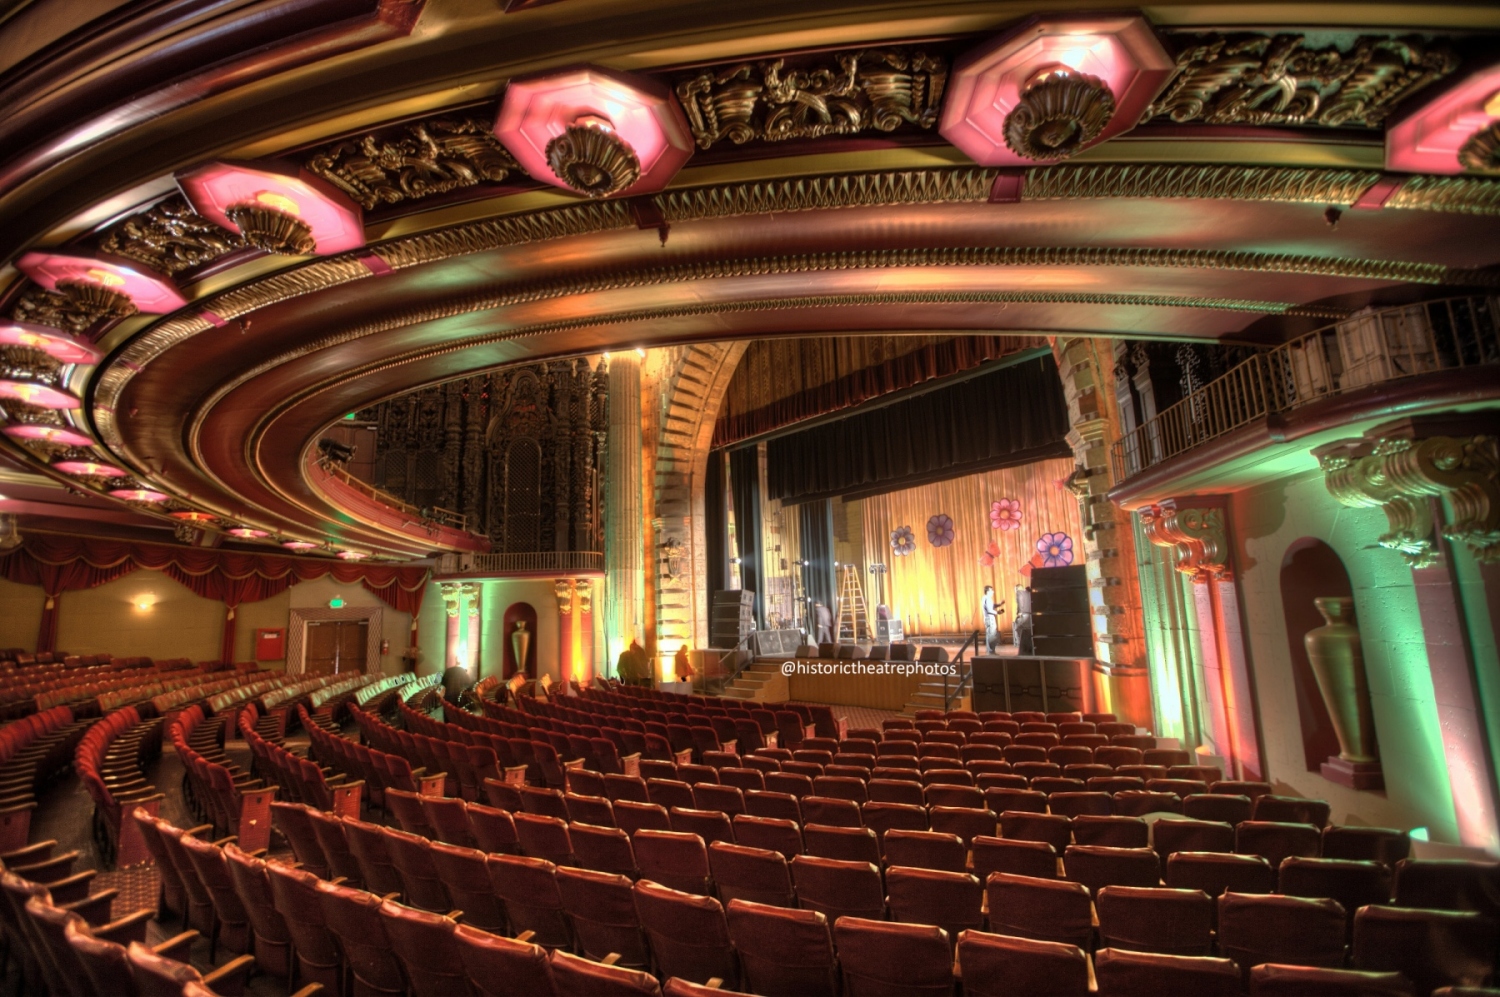 Million Dollar Theatre, Los Angeles: Orchestra seating under balcony soffit